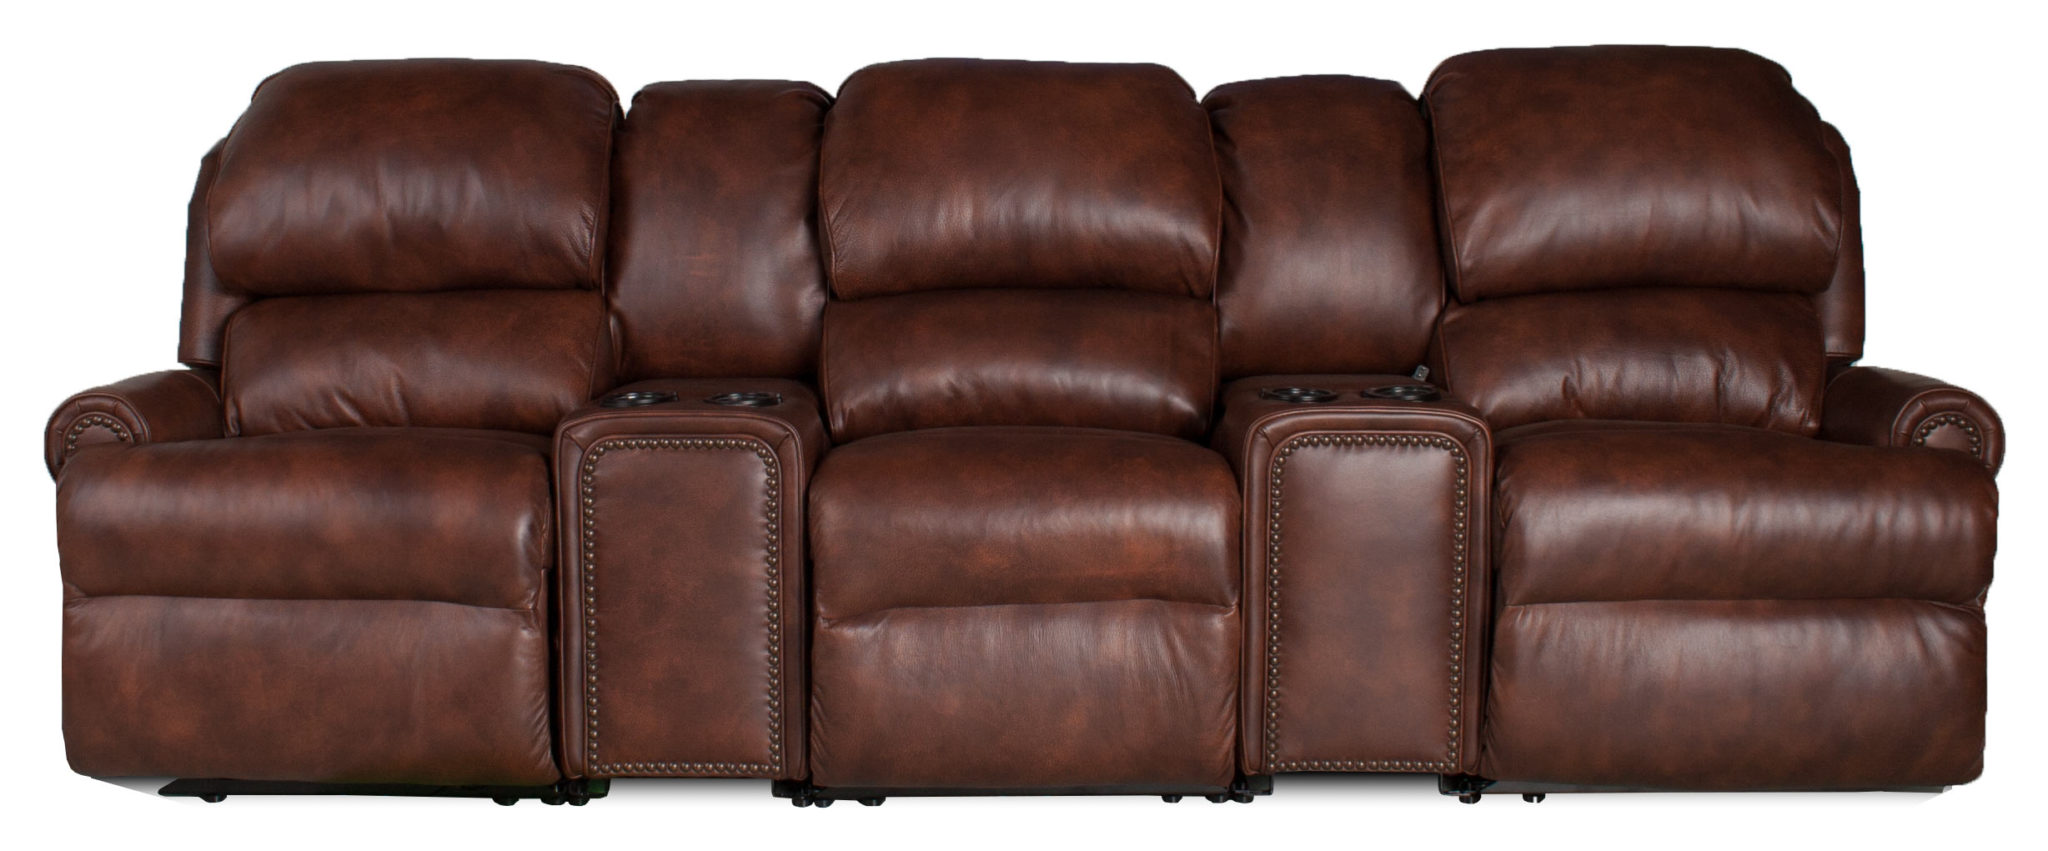 Barrington Leather Home Theater Seating from Leather Creations